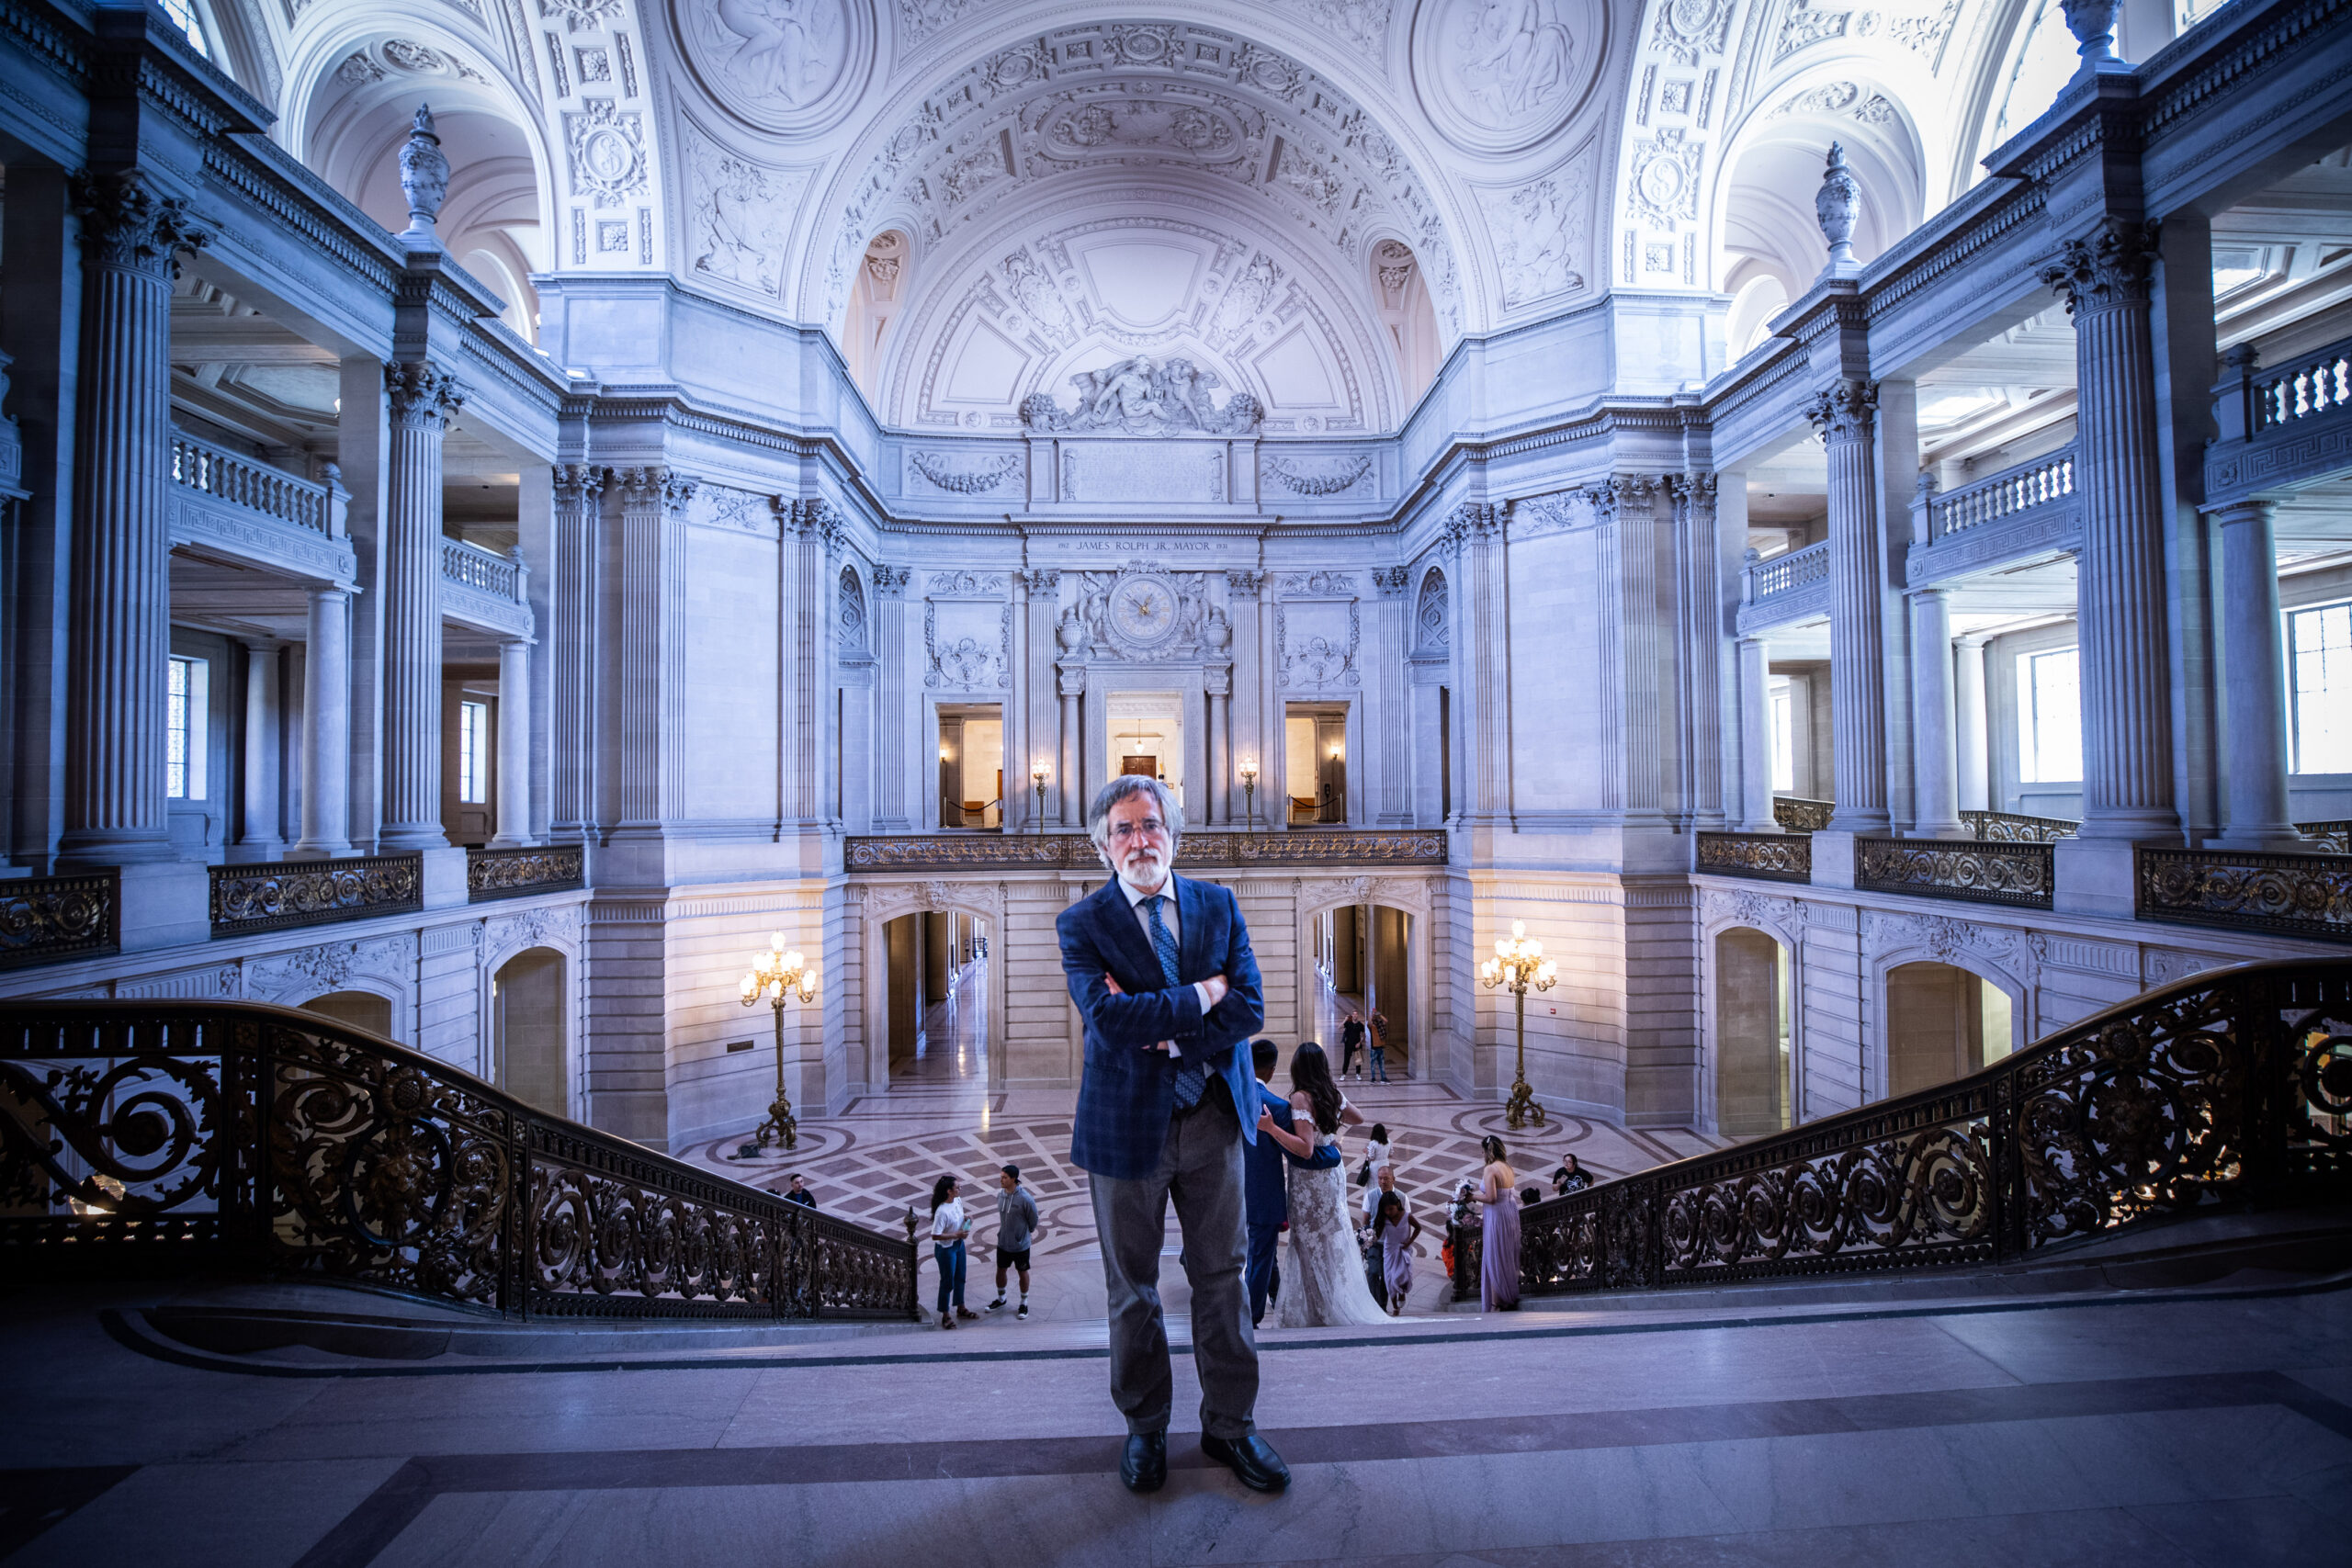 A man stands on an ornate staircase inside a grand, neoclassical hall with intricate architectural details.